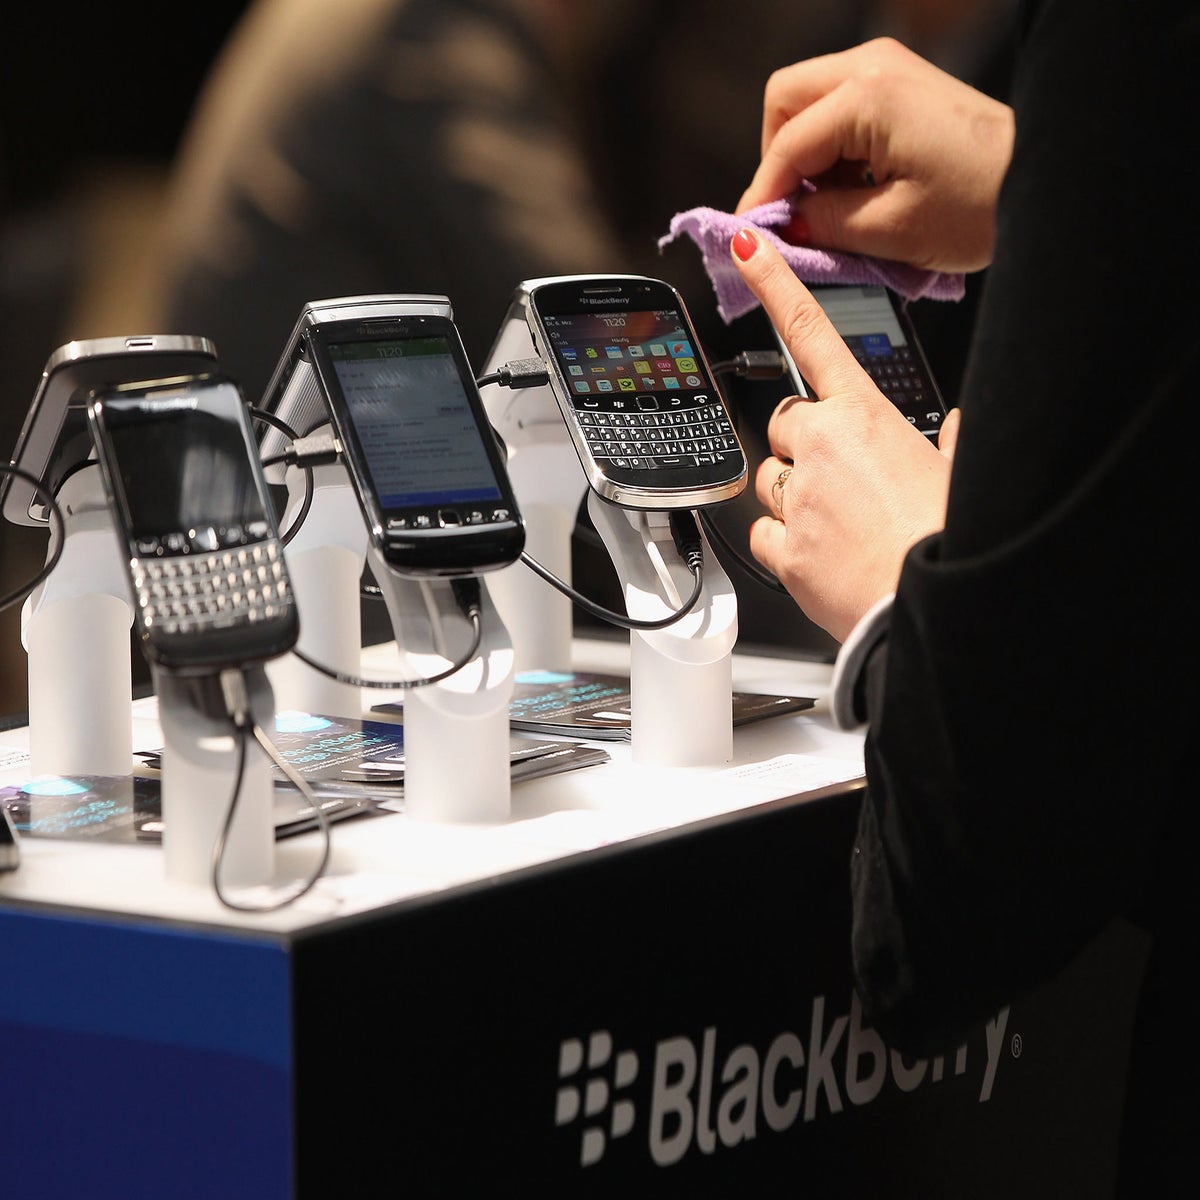 Blackberry to ditch Classic keyboard smartphone, The Independent